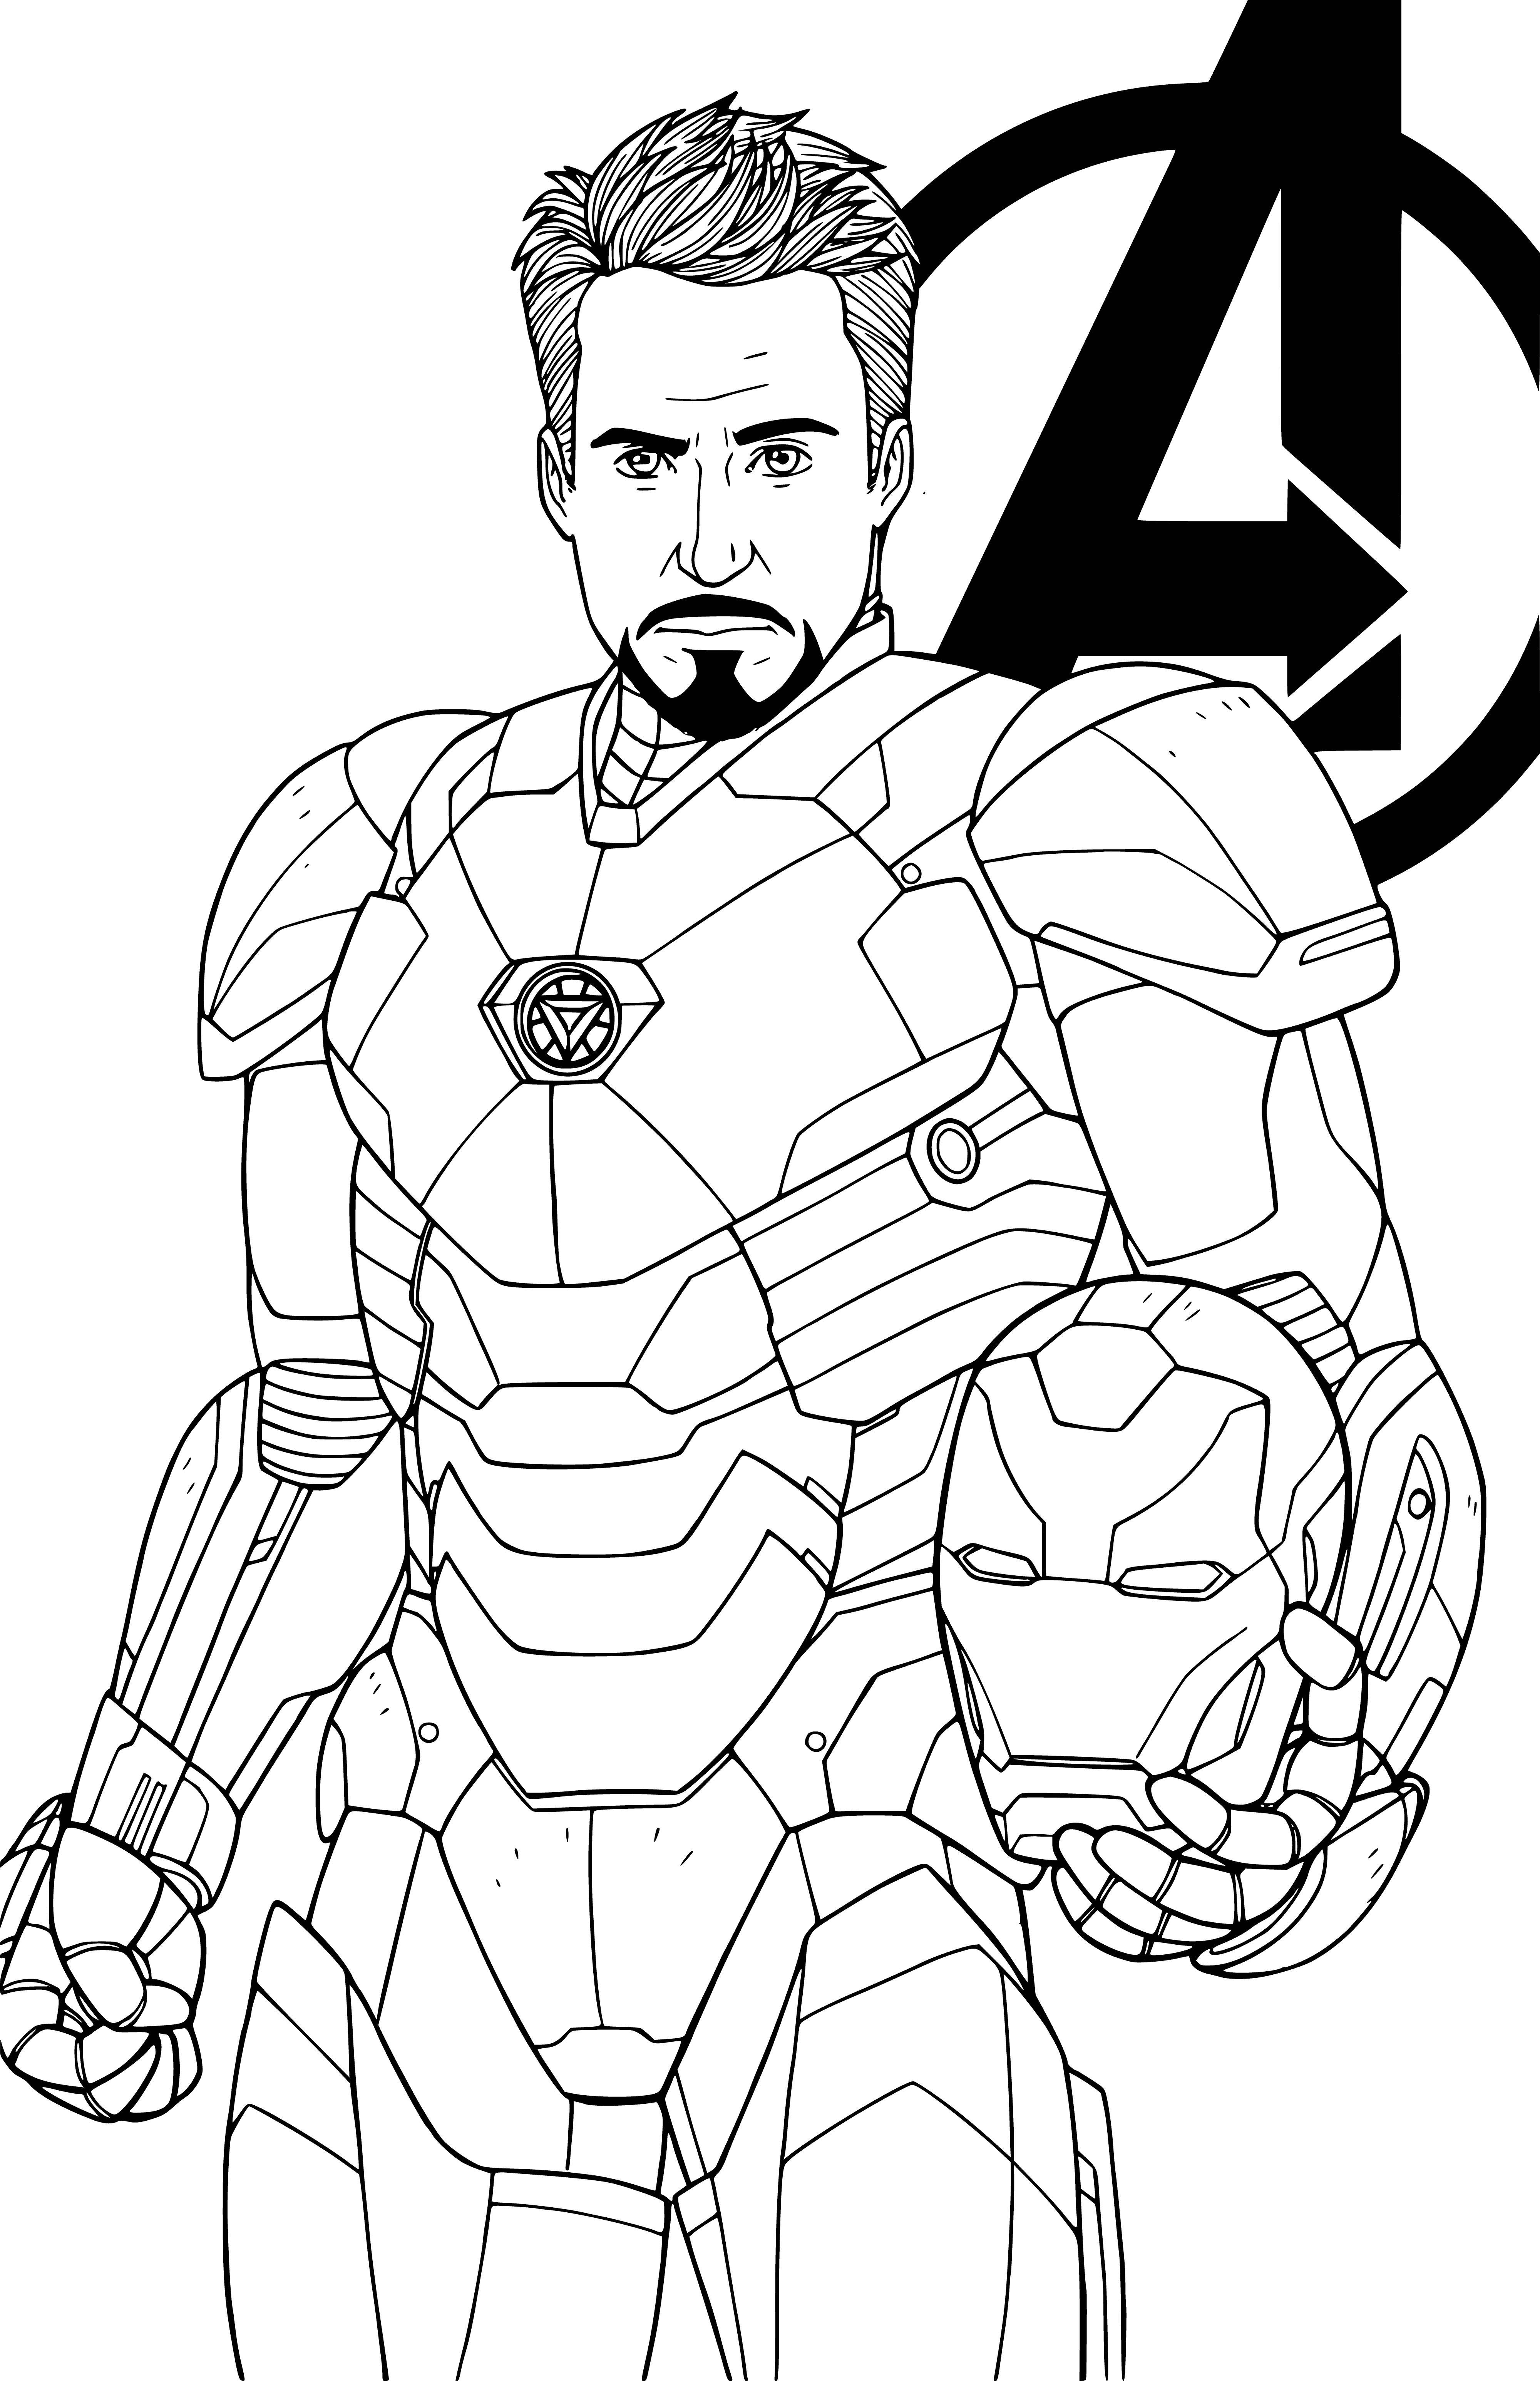 coloring page: Man in metal suit flying with jetpack, has rectangular shape on chest & circles around eyes.